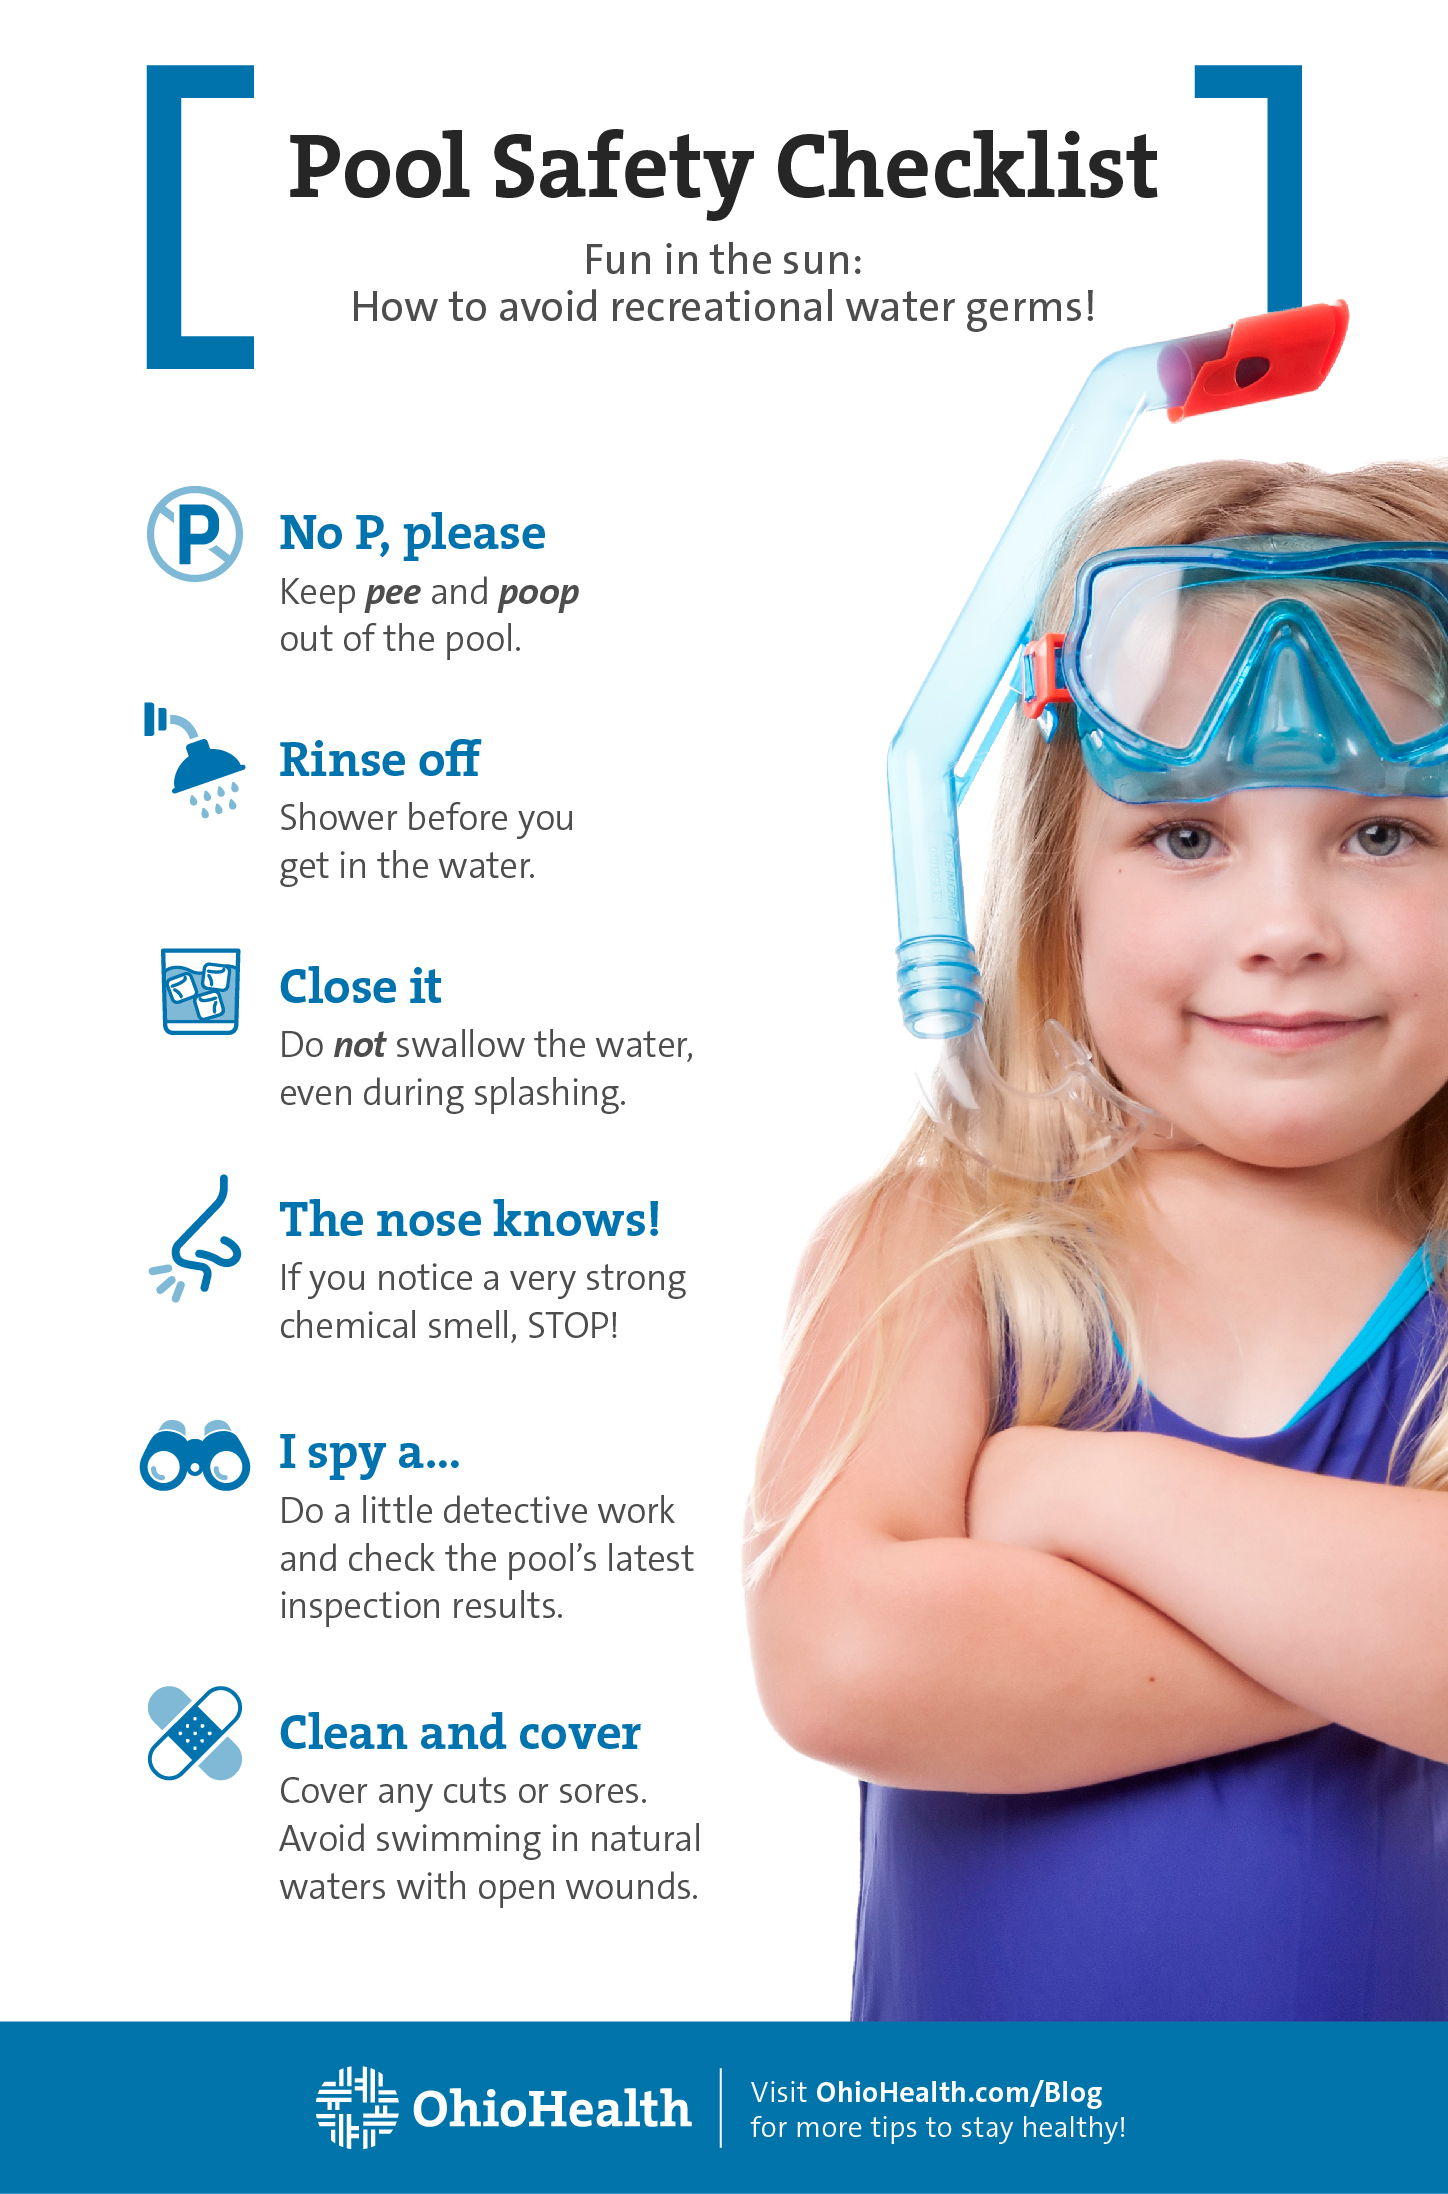 Infographic with tips for pool safety during the summer